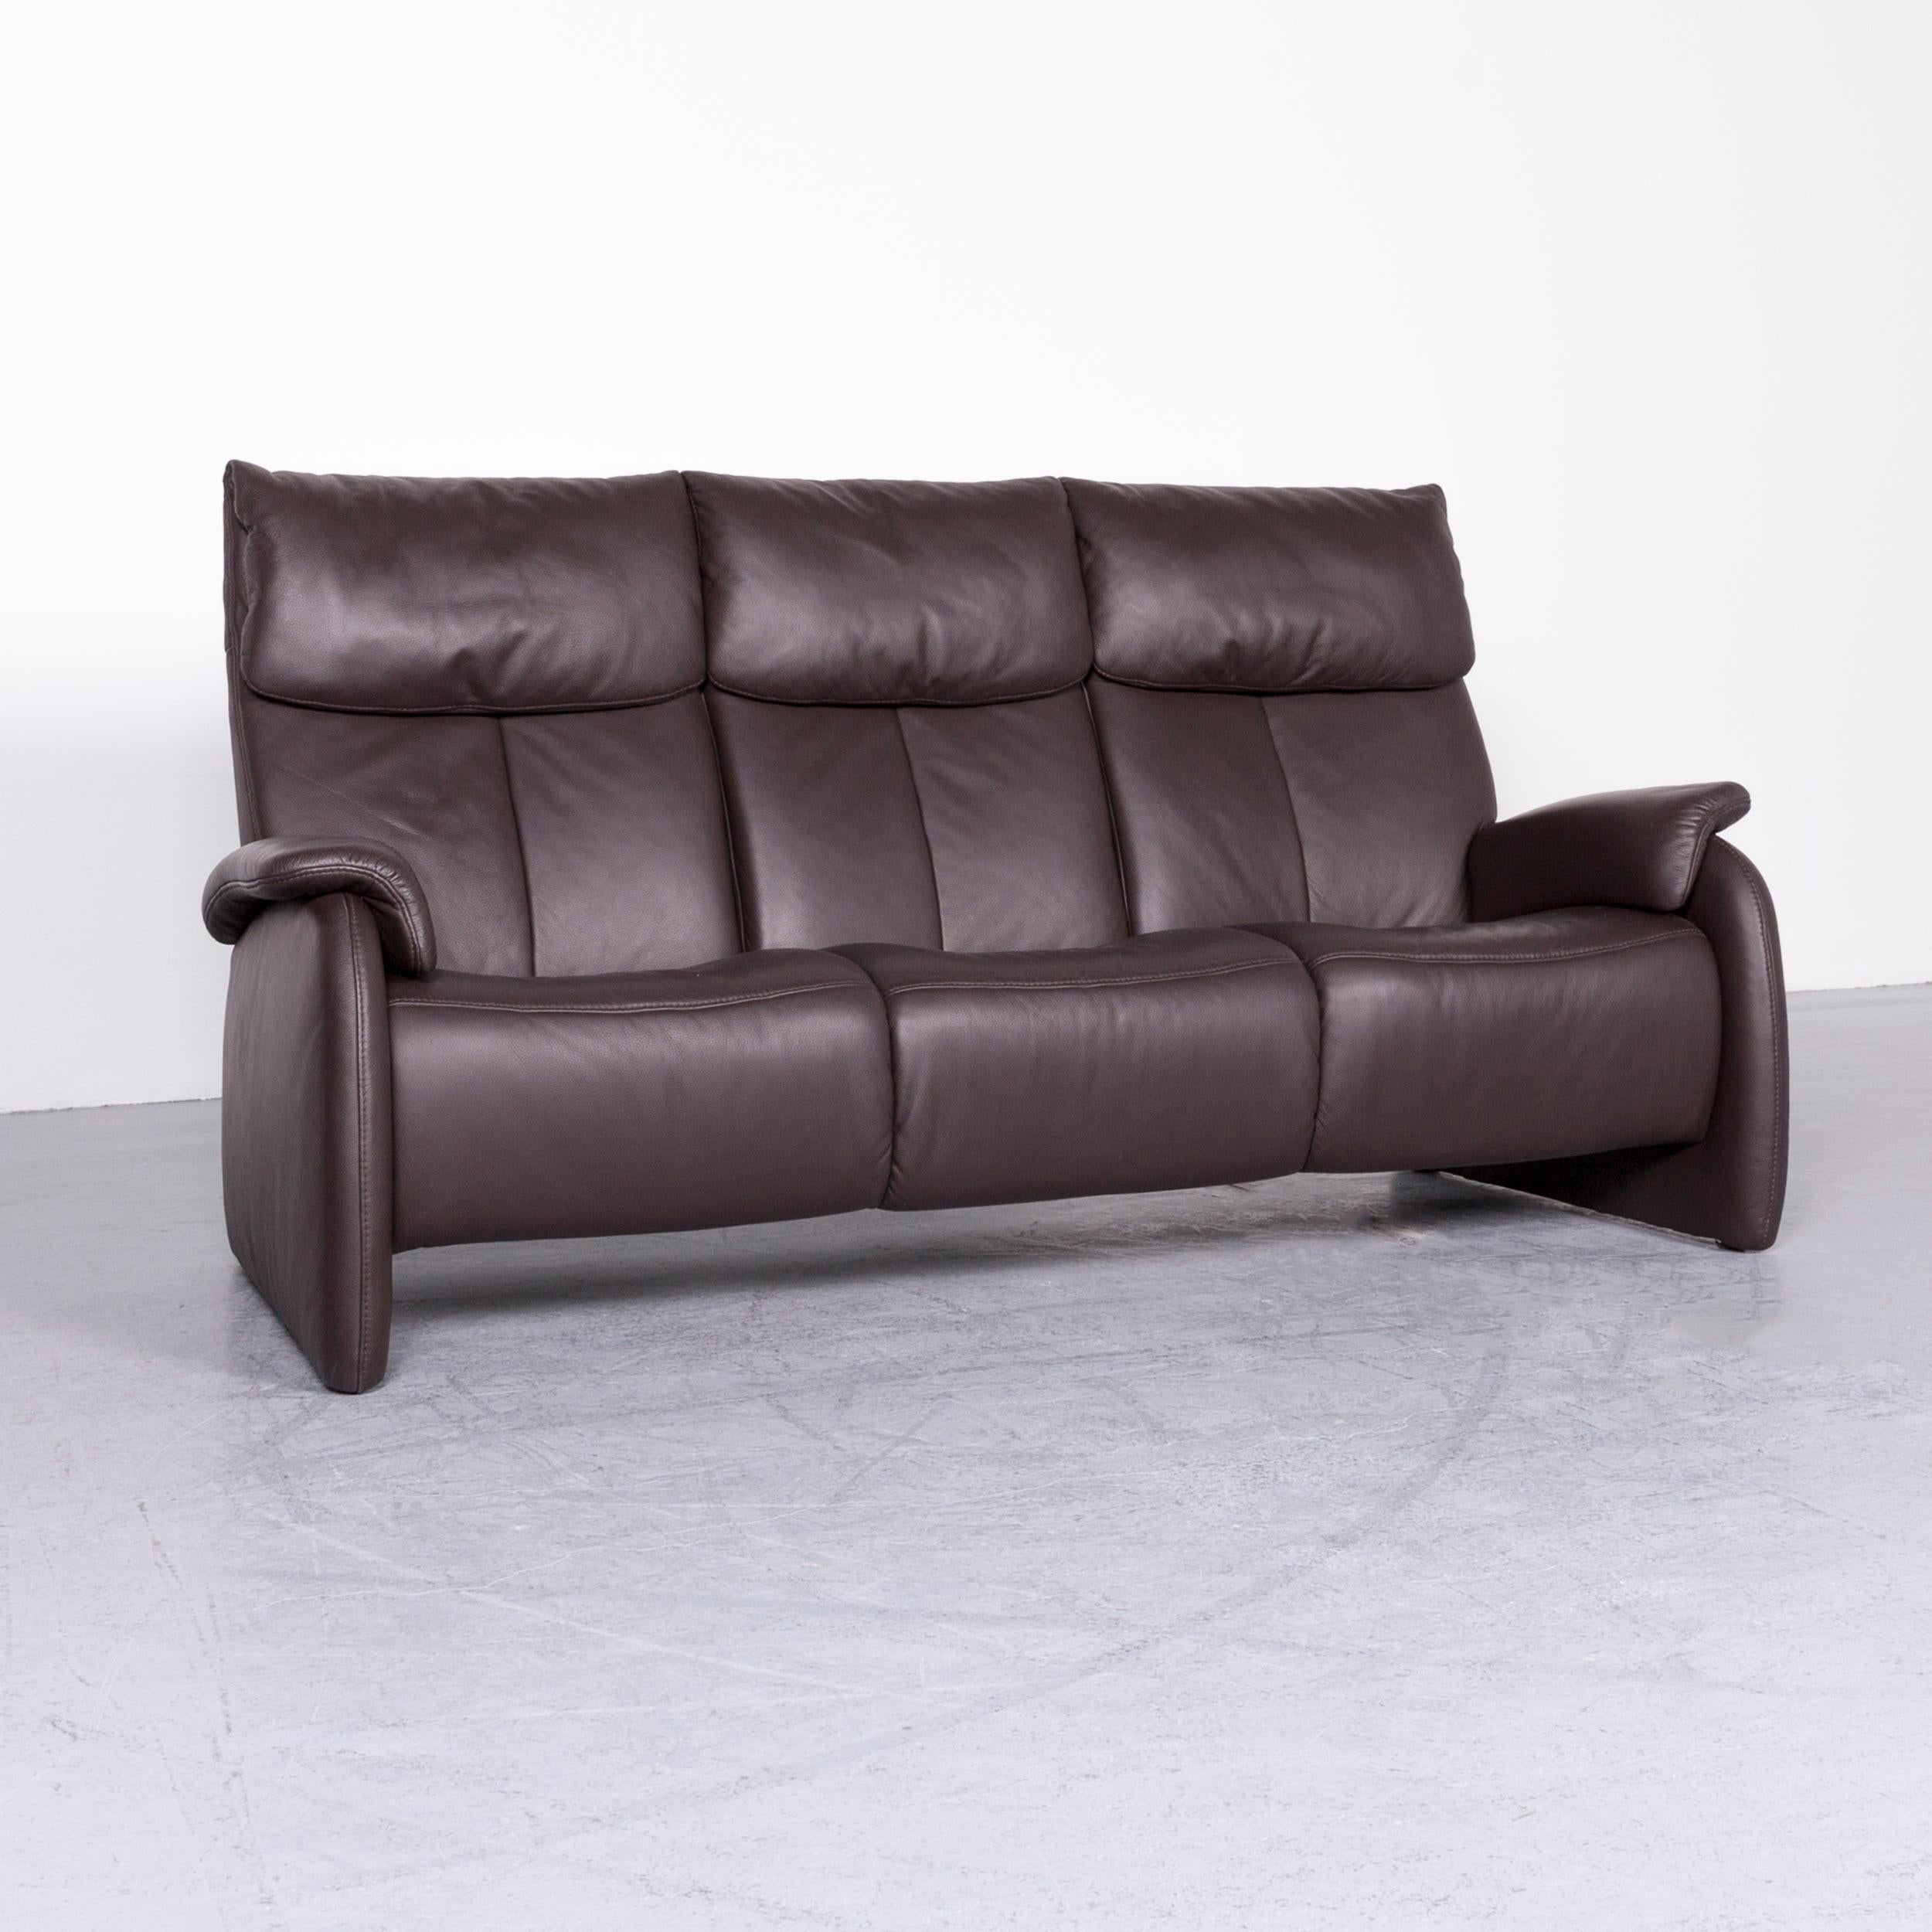 Modern Himolla Designer Sofa Brown Leather Three-Seat Couch